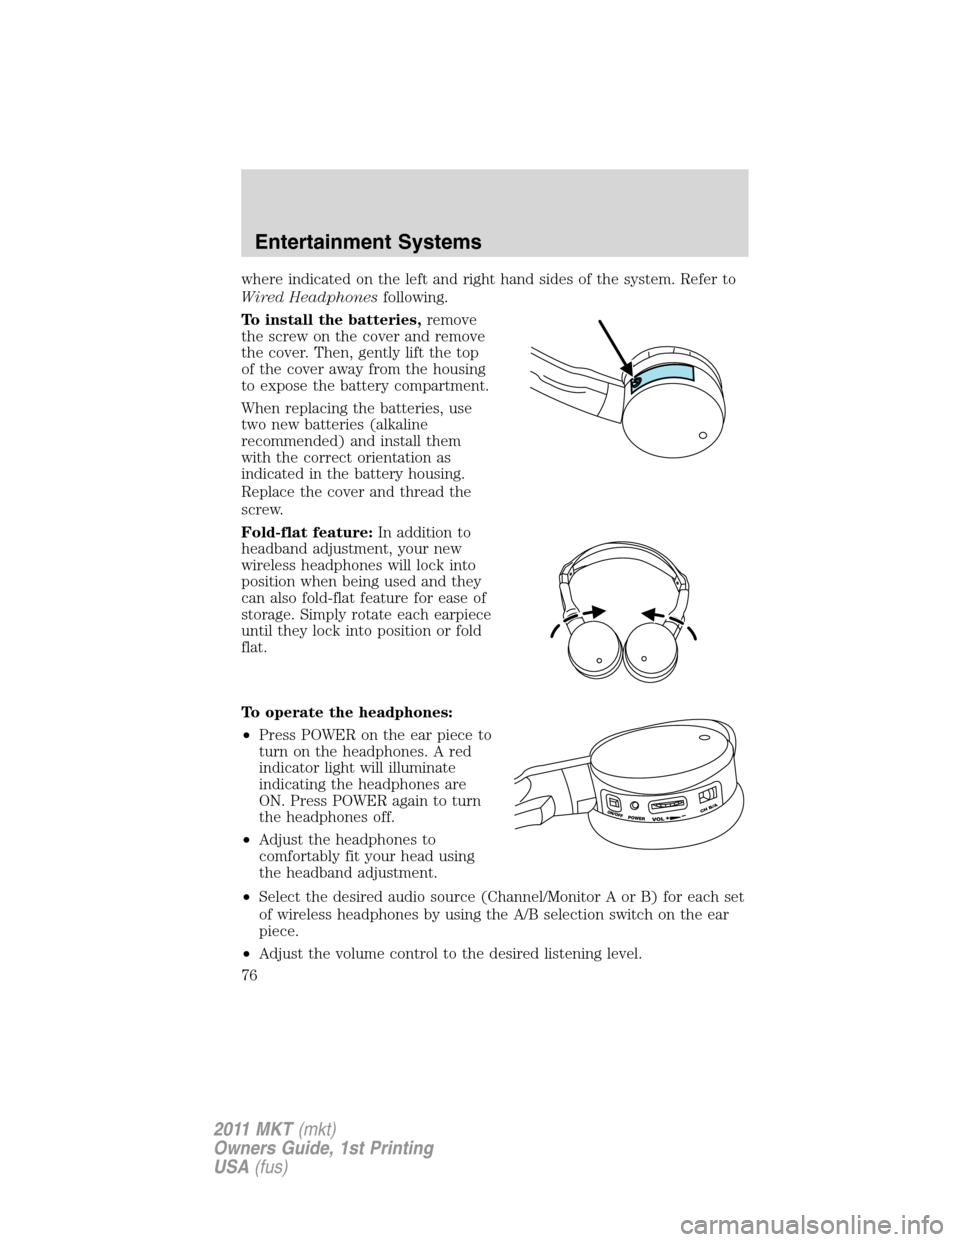 LINCOLN MKT 2011  Owners Manual where indicated on the left and right hand sides of the system. Refer to
Wired Headphonesfollowing.
To install the batteries,remove
the screw on the cover and remove
the cover. Then, gently lift the t